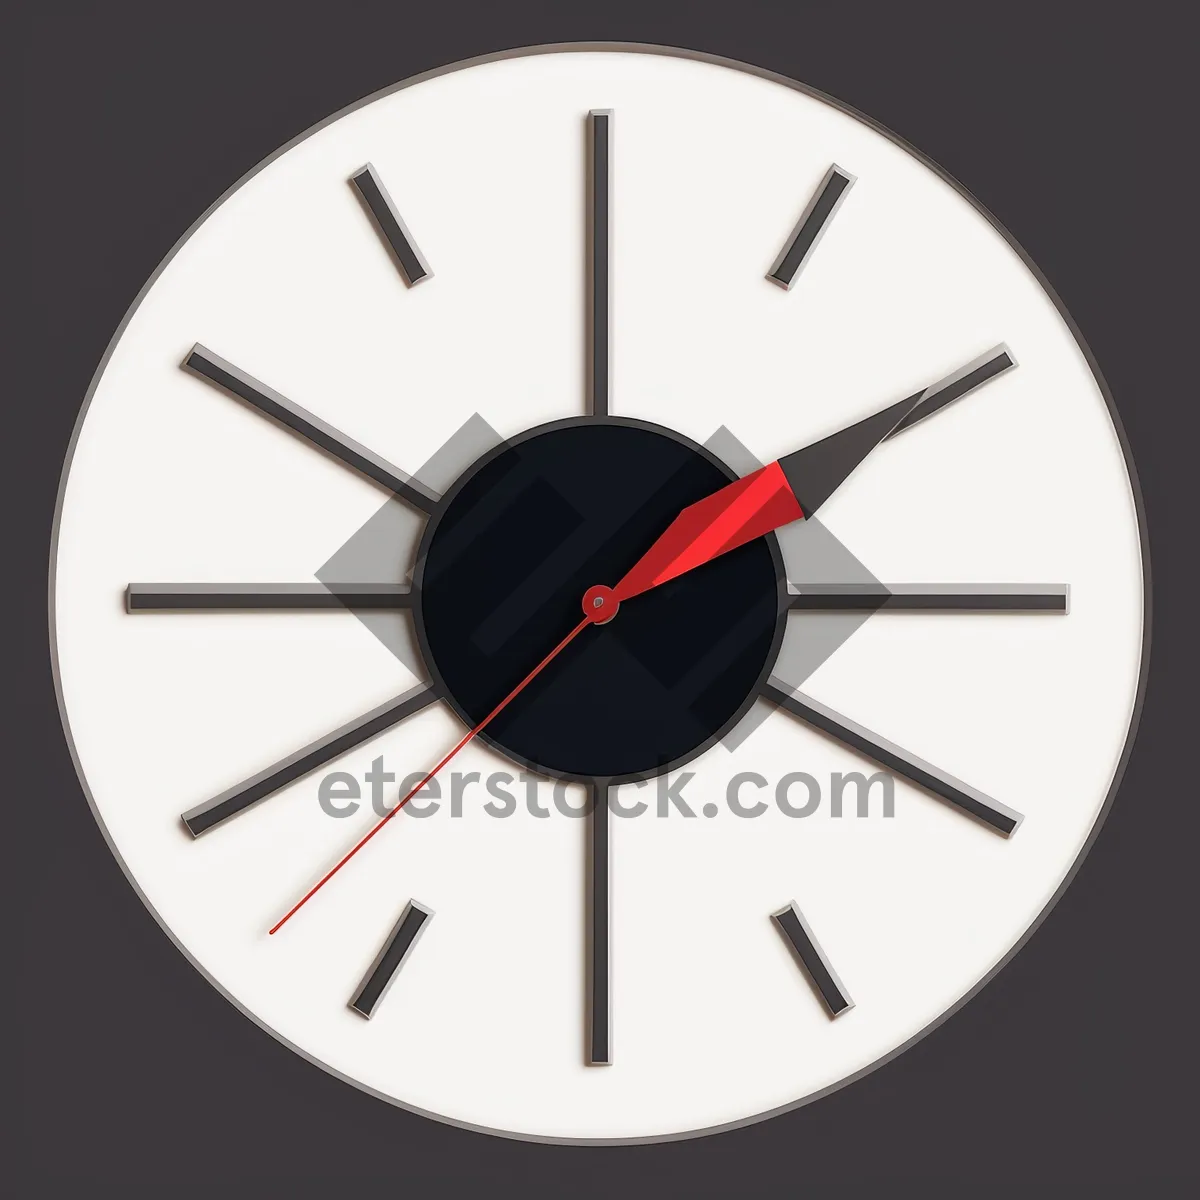 Picture of Analog Clock with Minute and Hour Hands